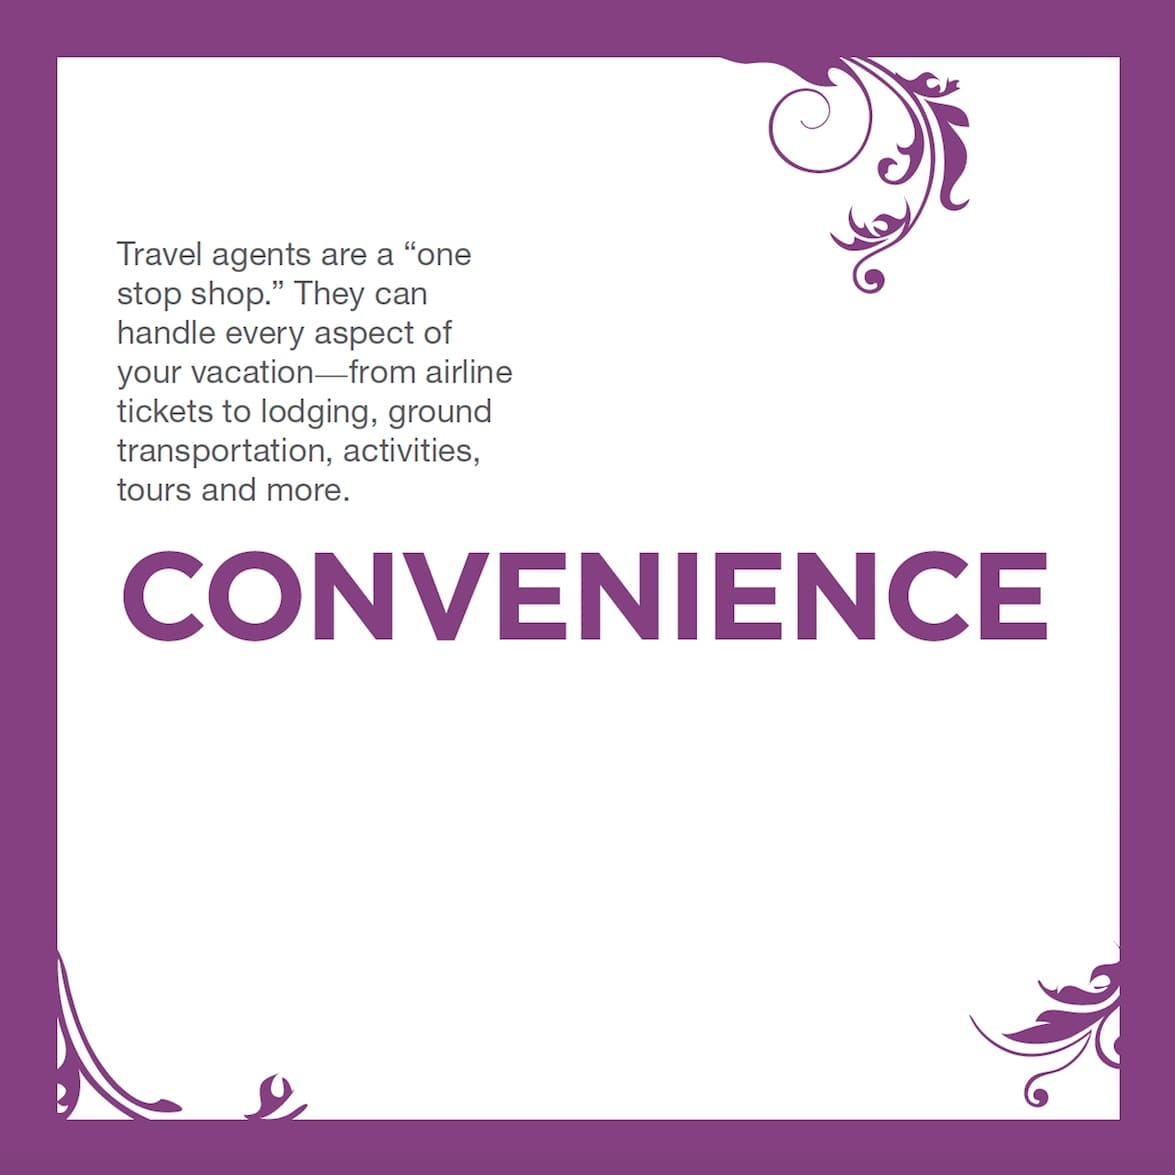 Why Use a Travel Agent?